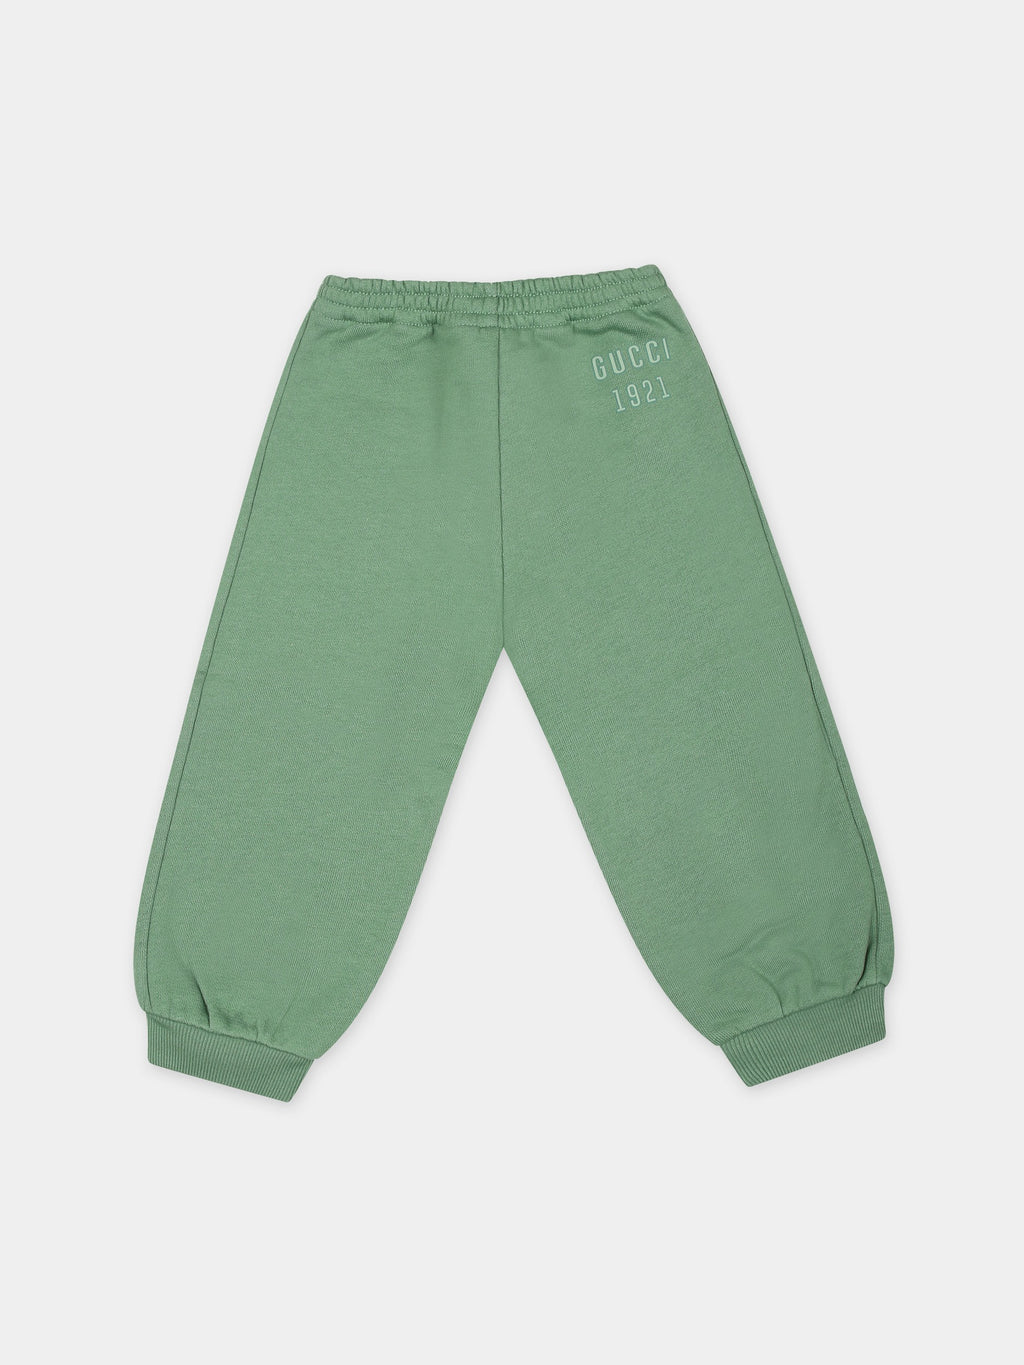 Green trousers for babykids with logo Gucci 1921